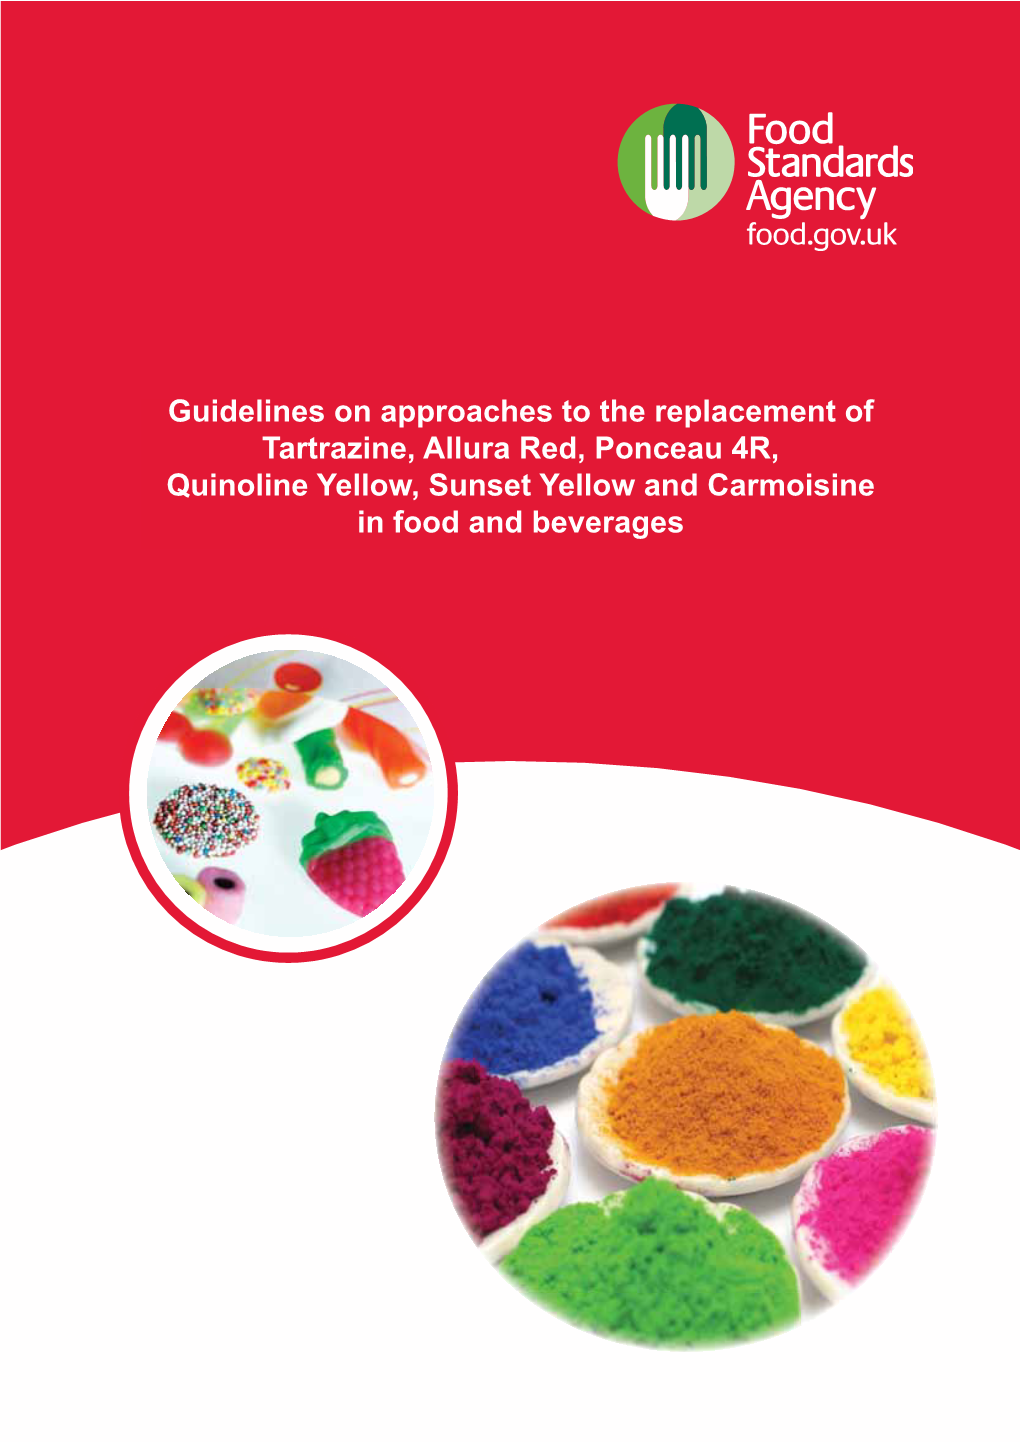 Guidelines on Approaches to the Replacement of Tartrazine, Allura Red, Ponceau 4R, Quinoline Yellow, Sunset Yellow and Carmoisine in Food and Beverages Summary